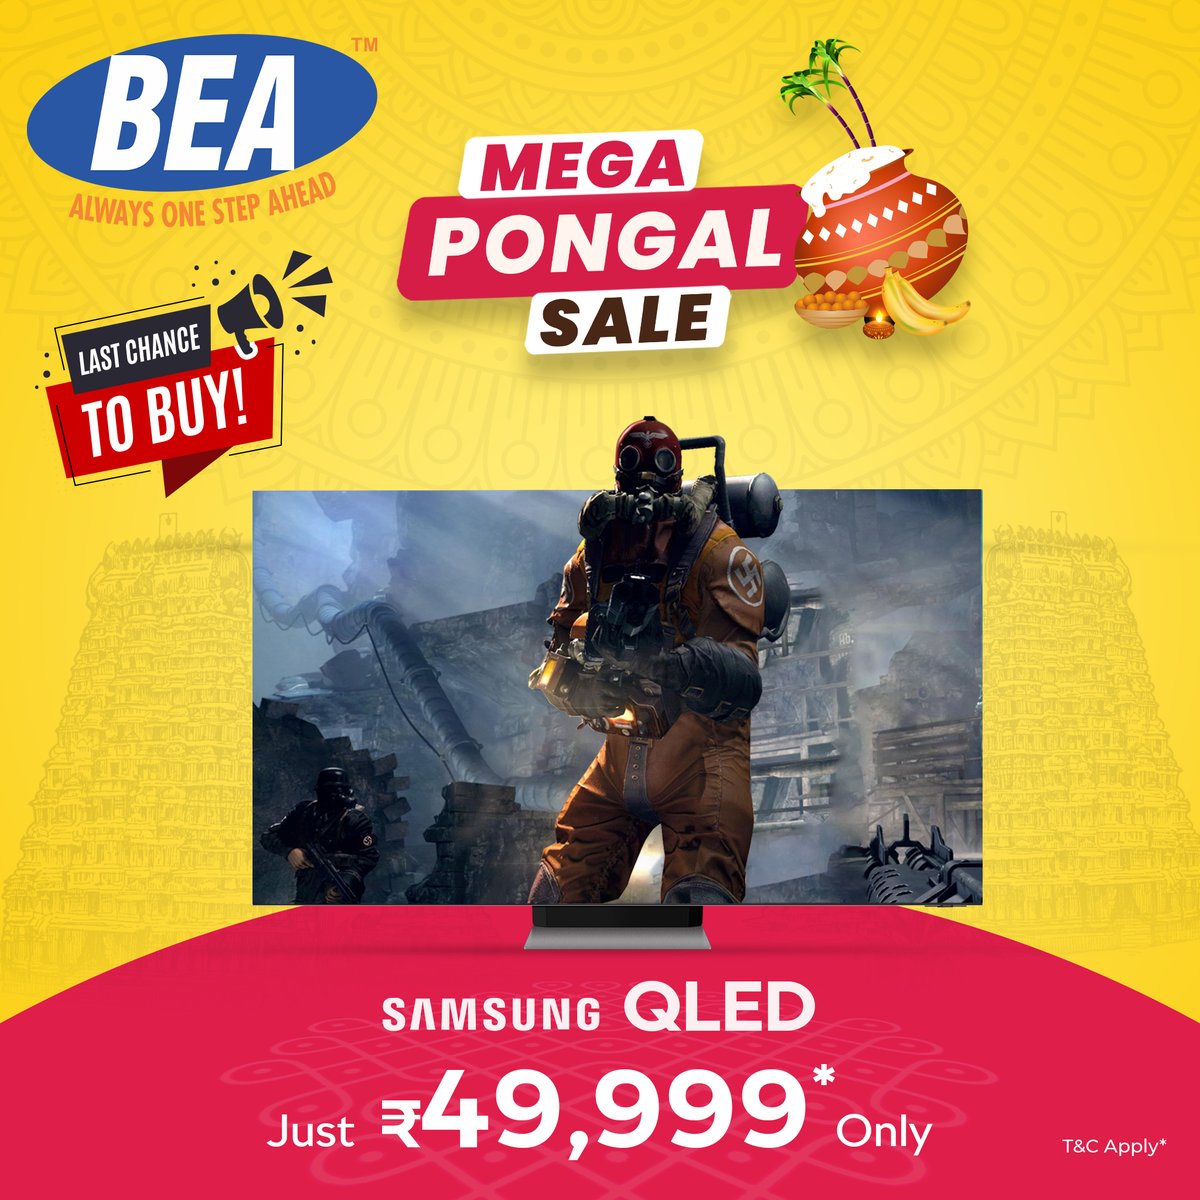 BEA Gives Never Before Price for Samsung QLED TV just ₹49,999* Only!

Add colors to your life with excellent with SAMSUNG QLED. 📺 

Check it out today!

💬:@ bot.bharathelectronics.in
📞:9842344323
WhatsApp linkto.contact/BEA-WhatsApp 

#BEA #Samsung #SamsungQLEDTV #QLED #Television